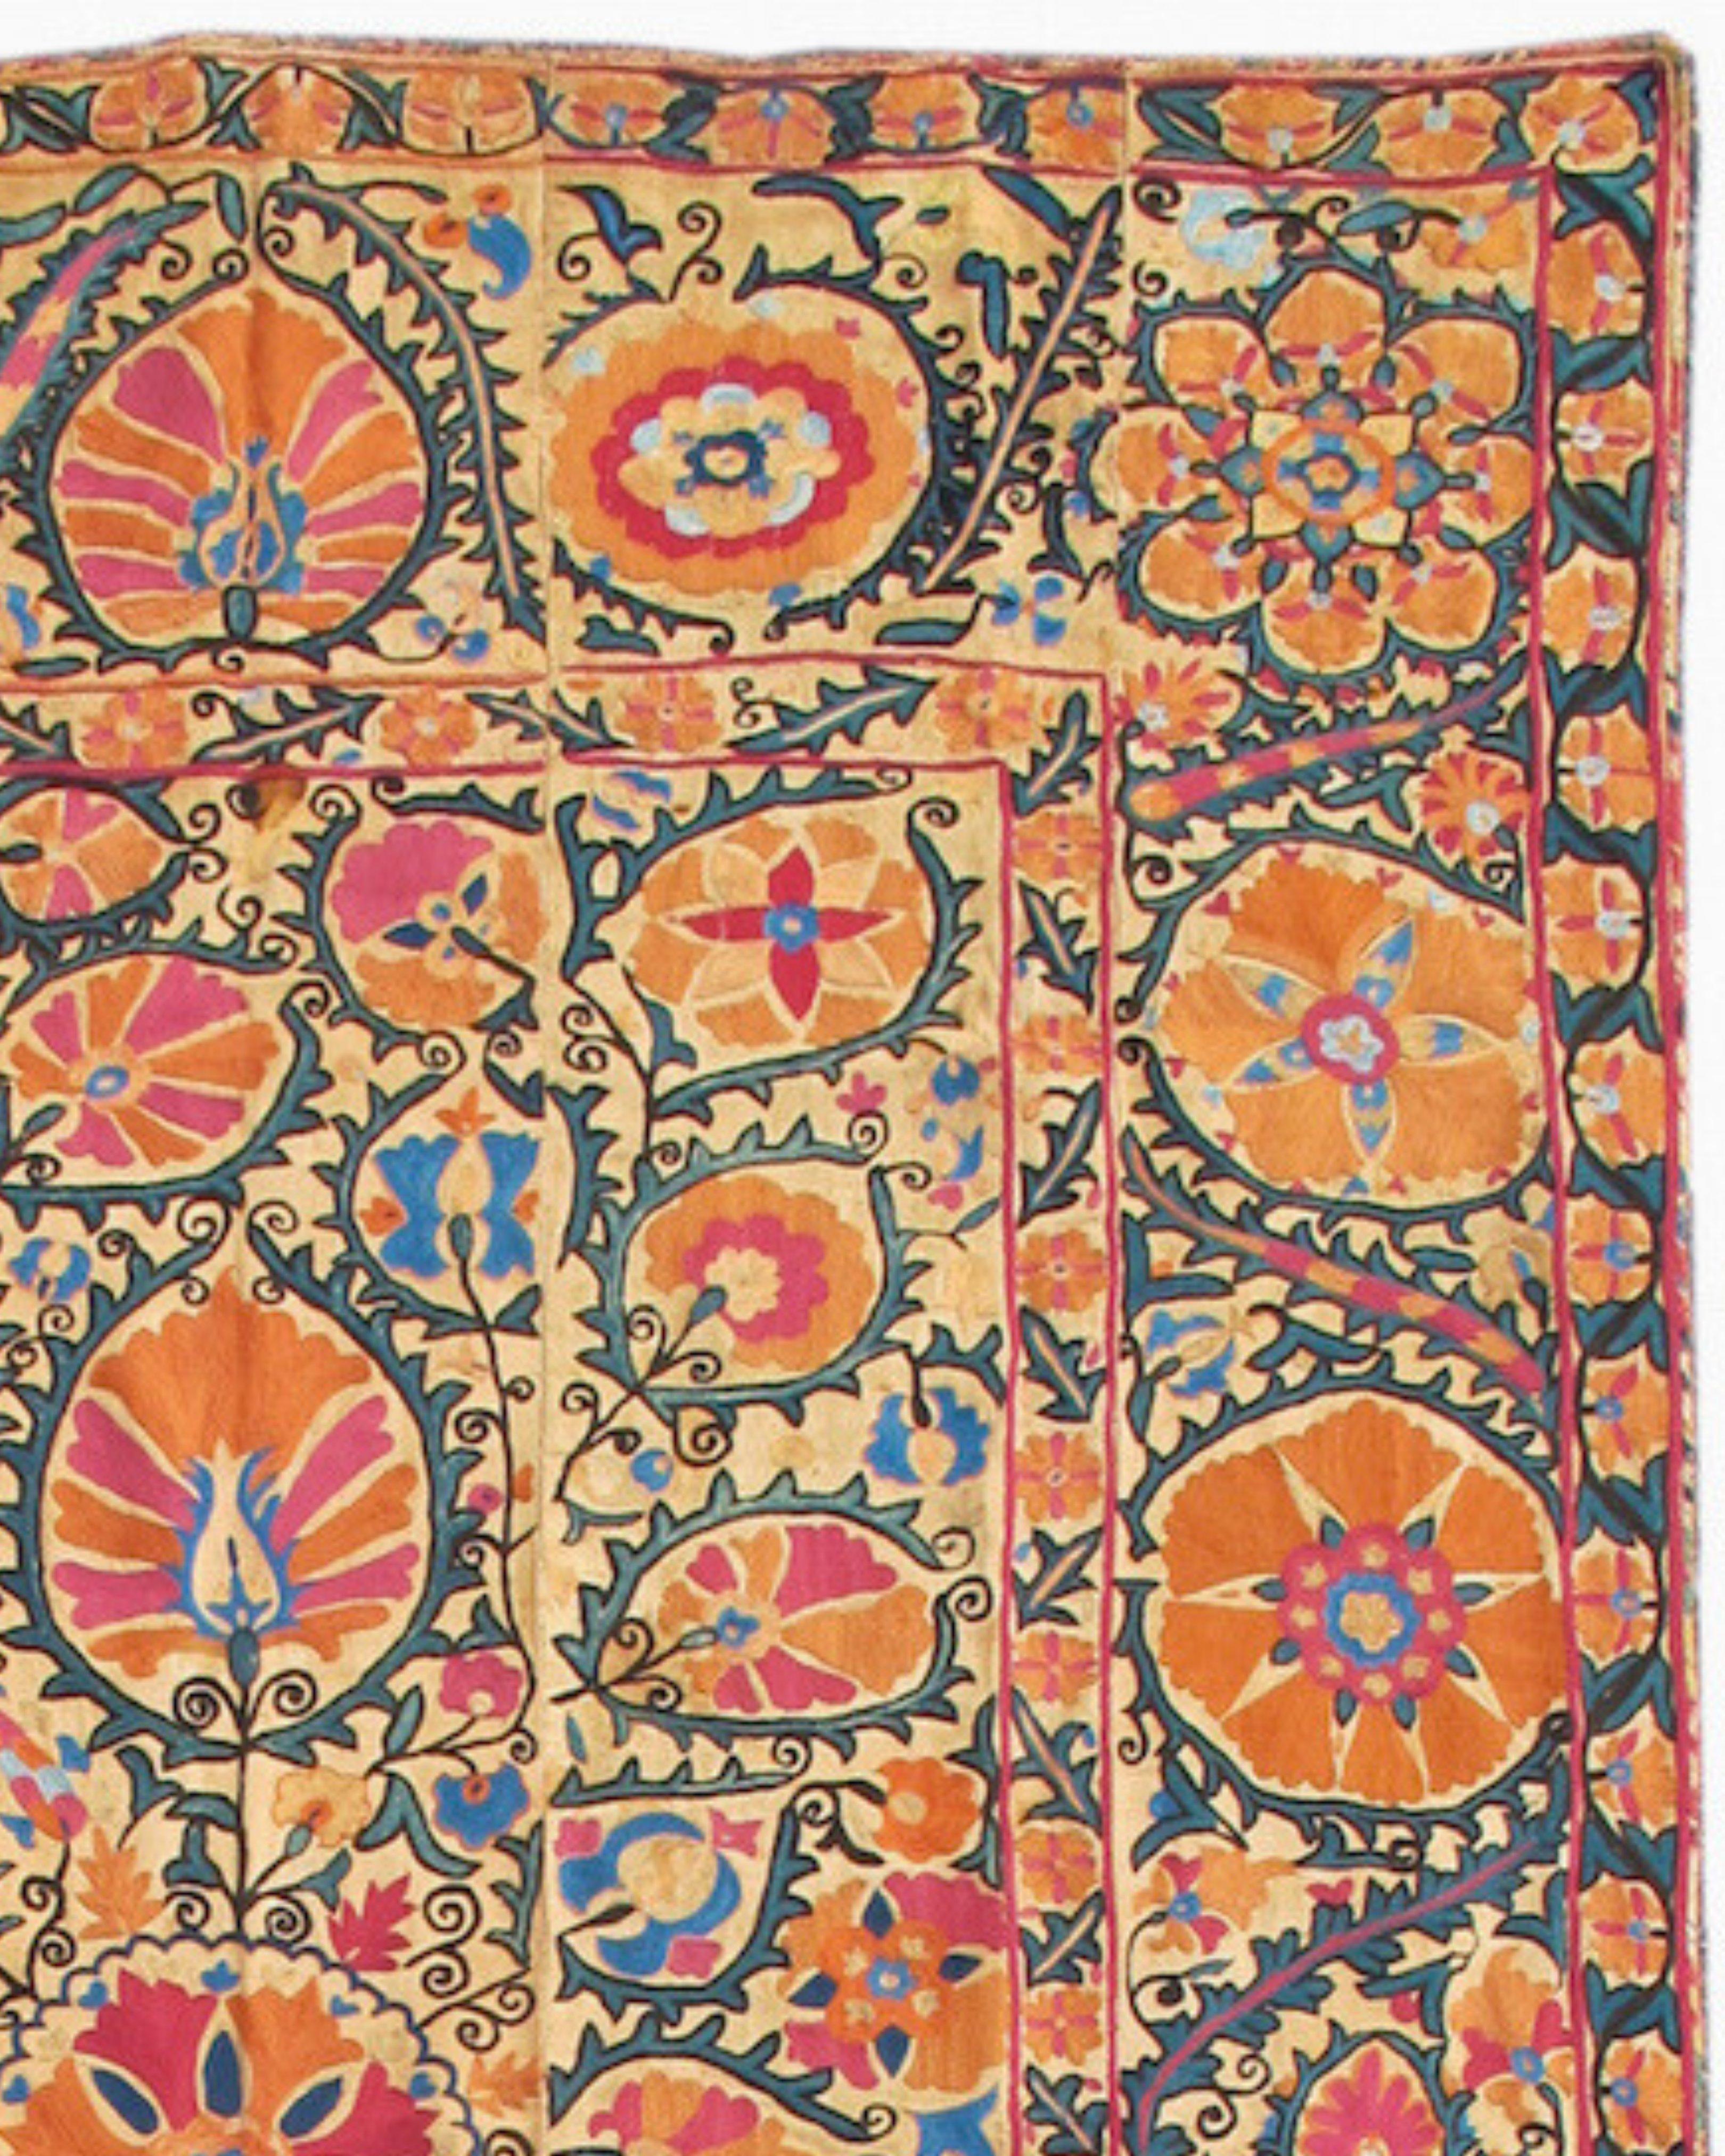 Antique Uzbek Bokhara Suzani Wall-Hanging Tapestry, Mid-19th Century In Good Condition For Sale In San Francisco, CA